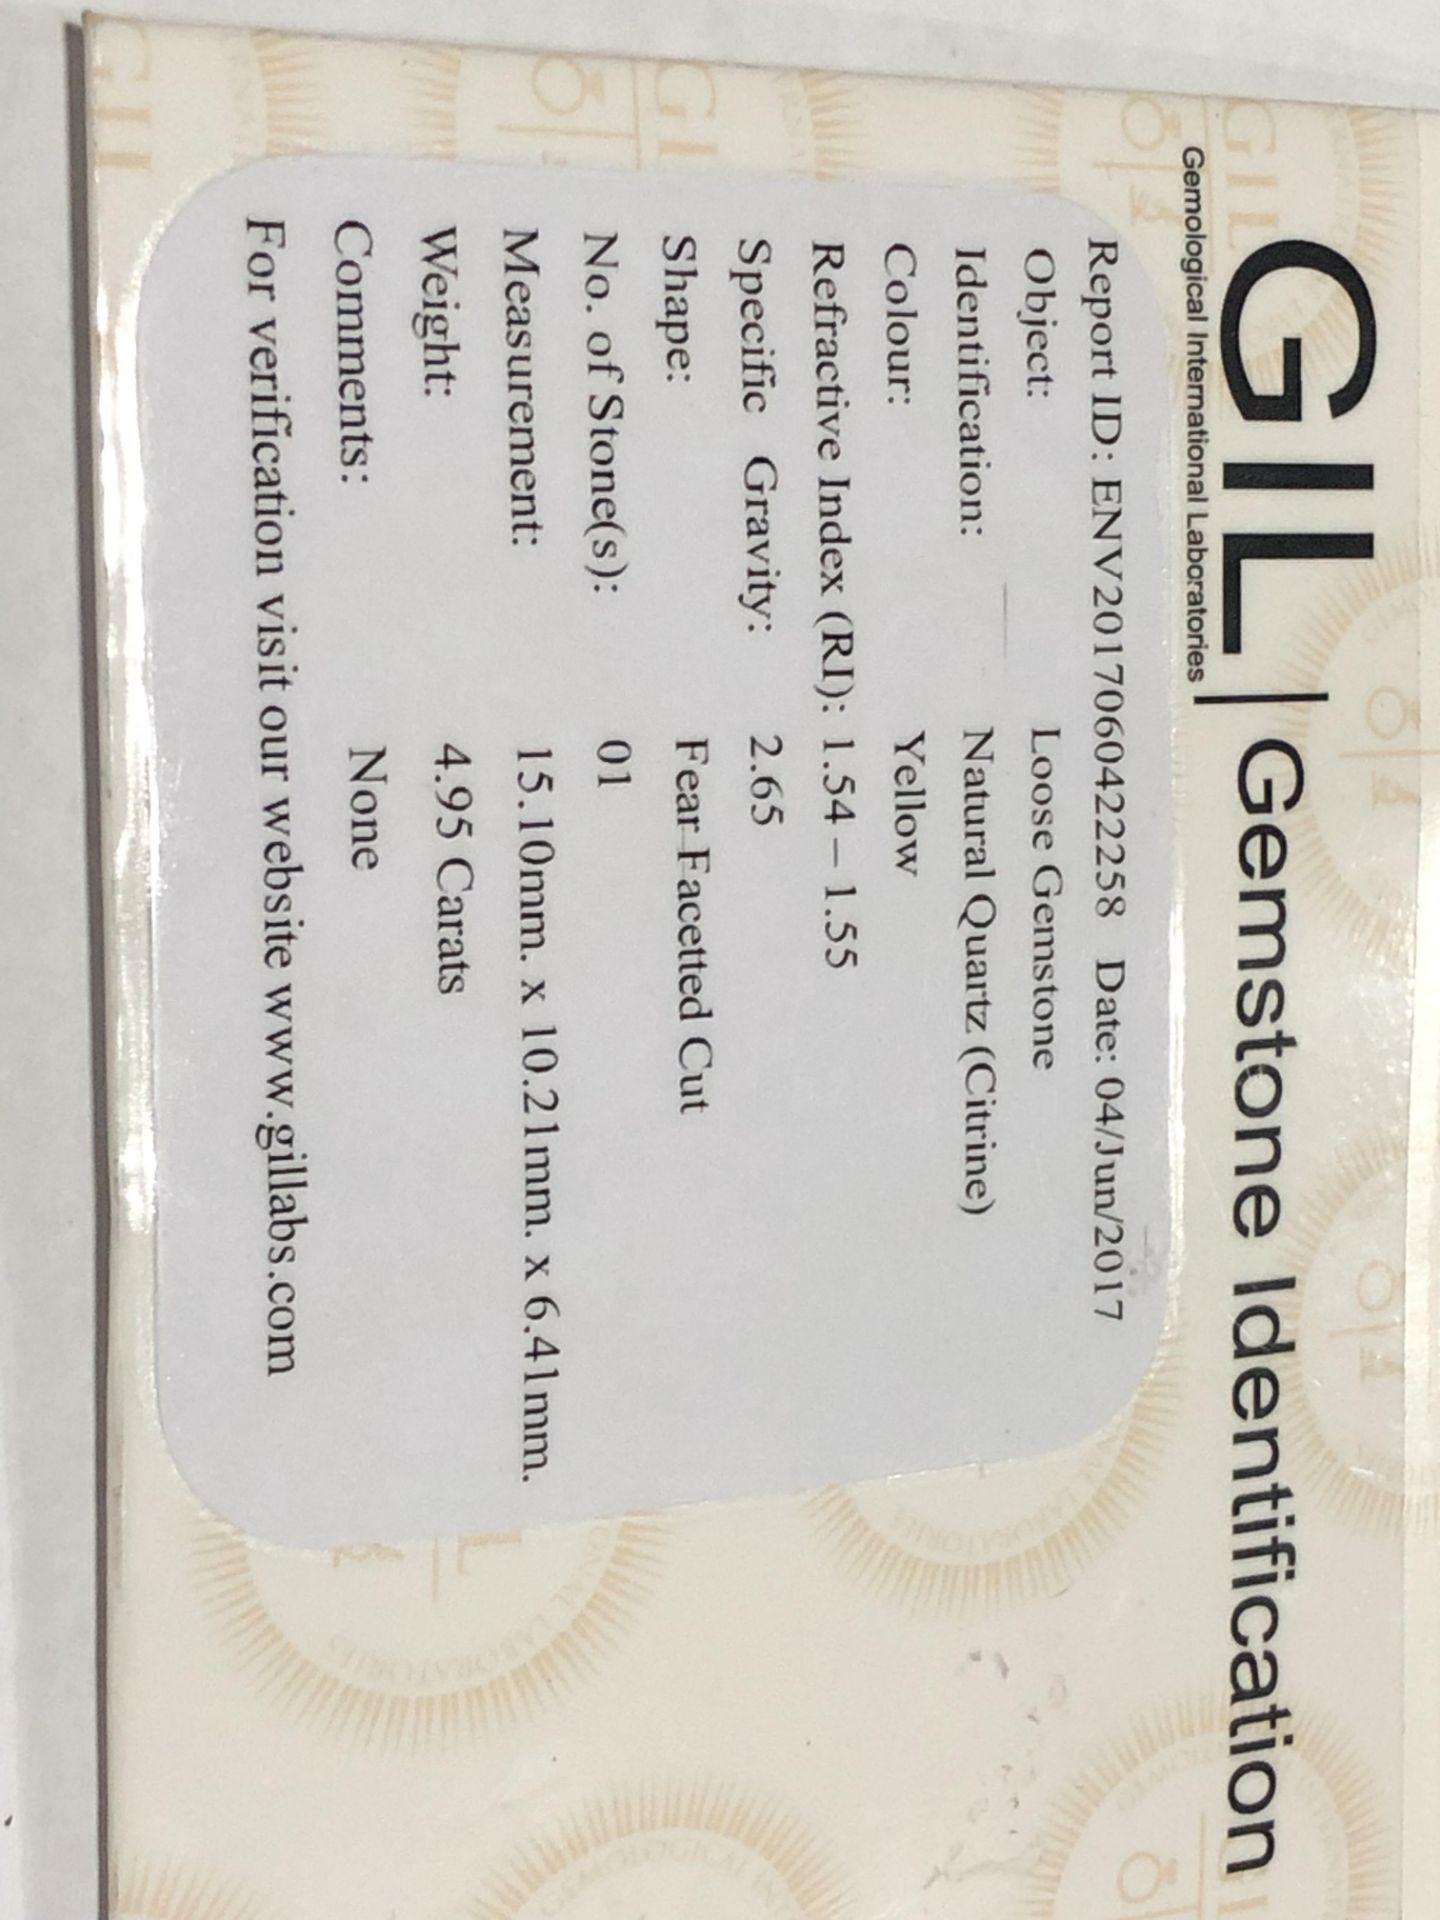 4.95ct Natural Quartz (Citrine) with GIL Certificate - Image 5 of 6